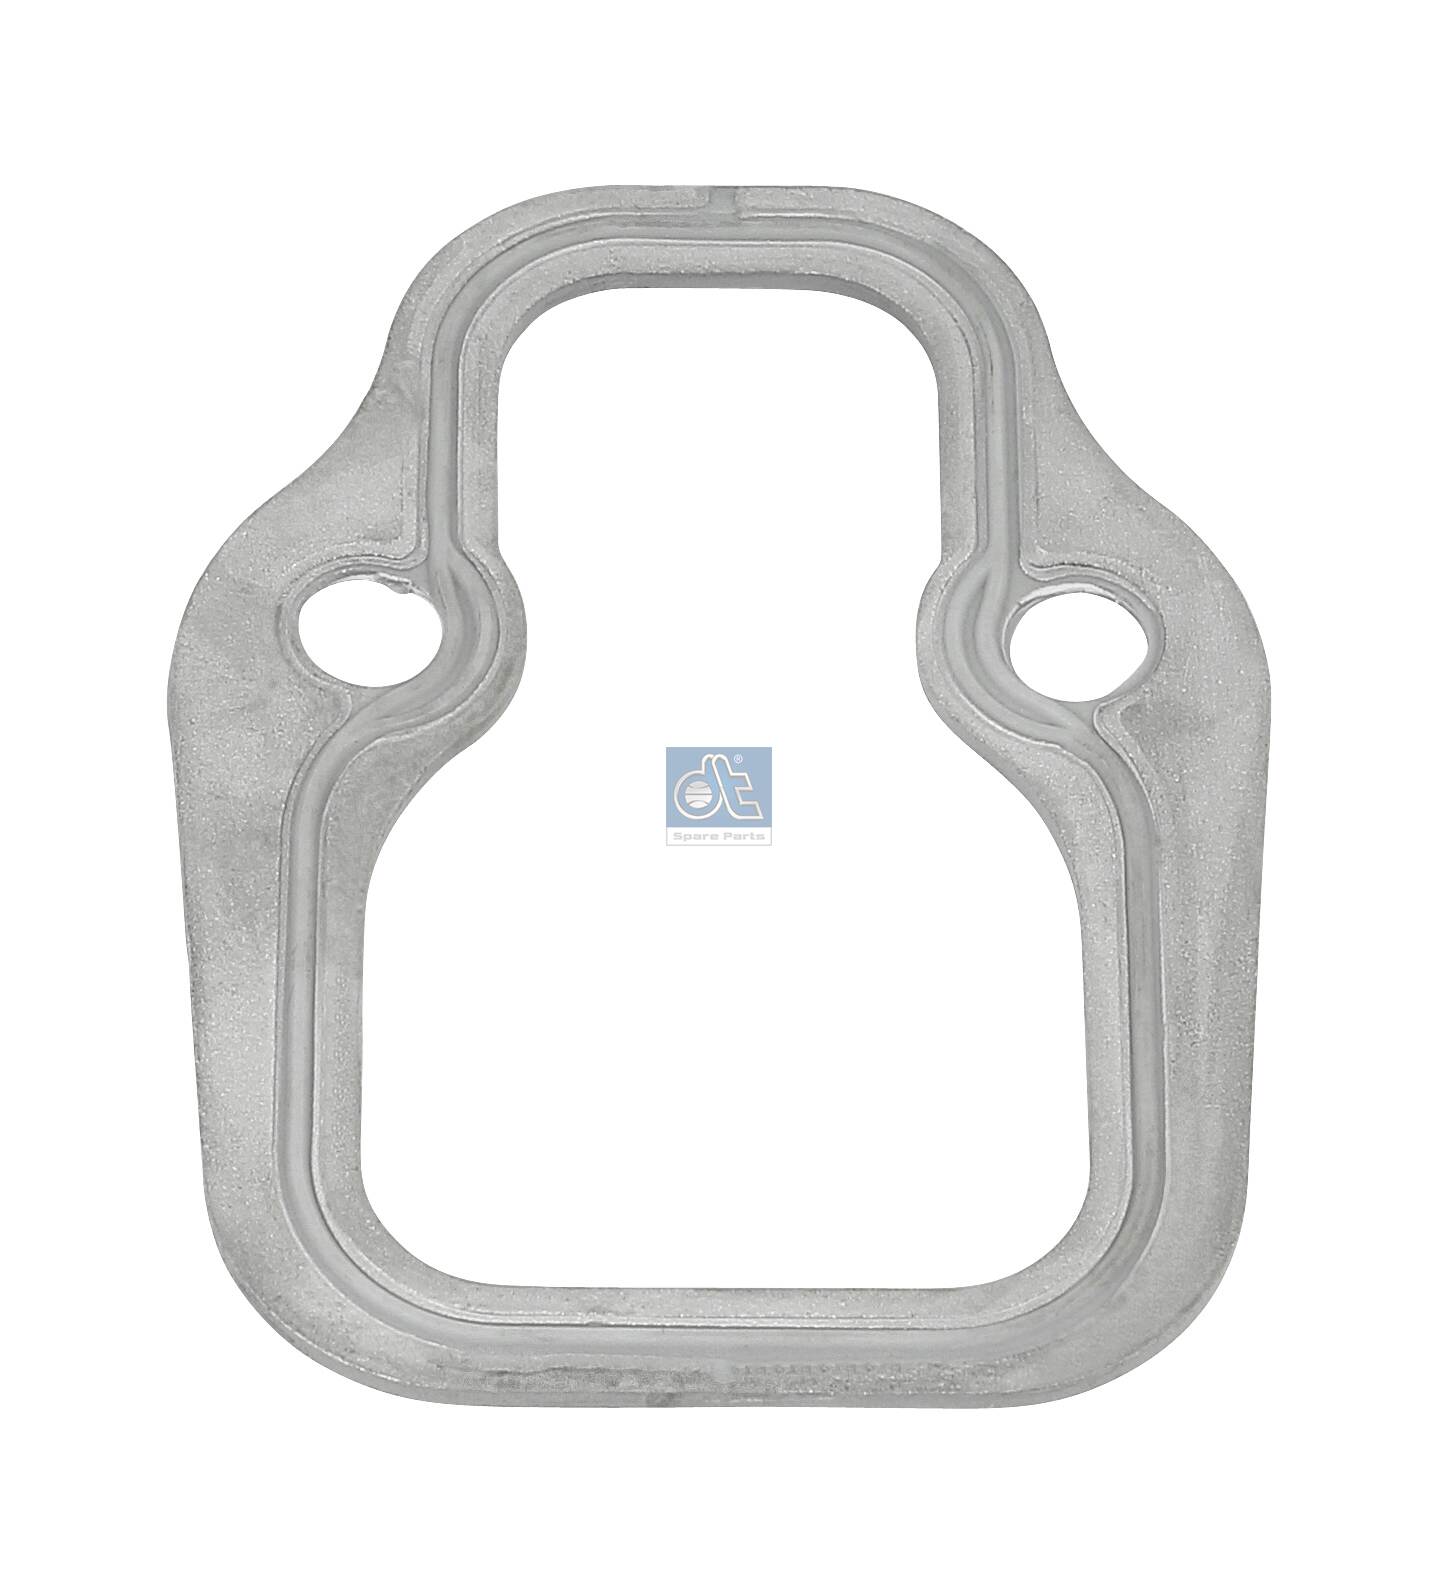 4.20213, Gasket, exhaust manifold, DT Spare Parts, 4031410380, 51.08902.0115, 4031411180, 51.08902.0135, 4031411080, 51.08902.0161, 4031410980, 51089020054, 51.08902.0054, 51.08902.0078, 51.08902.0079, 93212870194, A4031410980, 82.08902.0001, A4031411080, 4421411980, 51089020161, 93.21287.0194, A4031410380, 4421411780, 82089020001, 4421411880, 51089020079, 4421410480, 51089020078, 4421411080, 51089020135, 51089020115, 4241410480, A4421411880